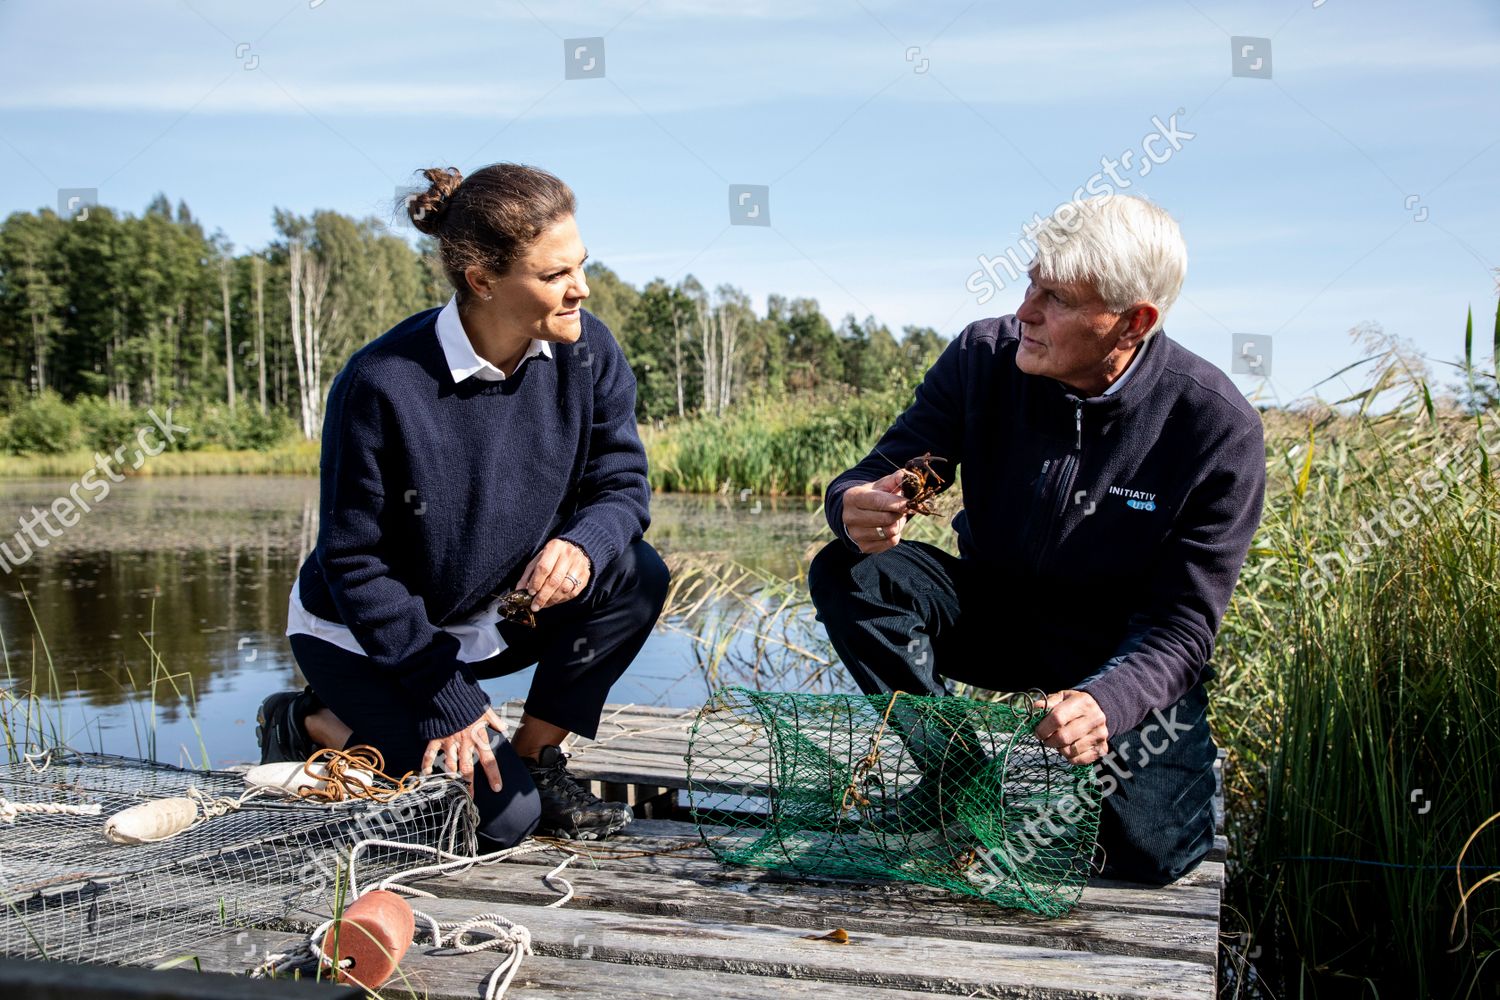 crown-princess-victoria-and-her-dog-rio-visit-alo-and-uto-sweden-shutterstock-editorial-12361980ak.jpg